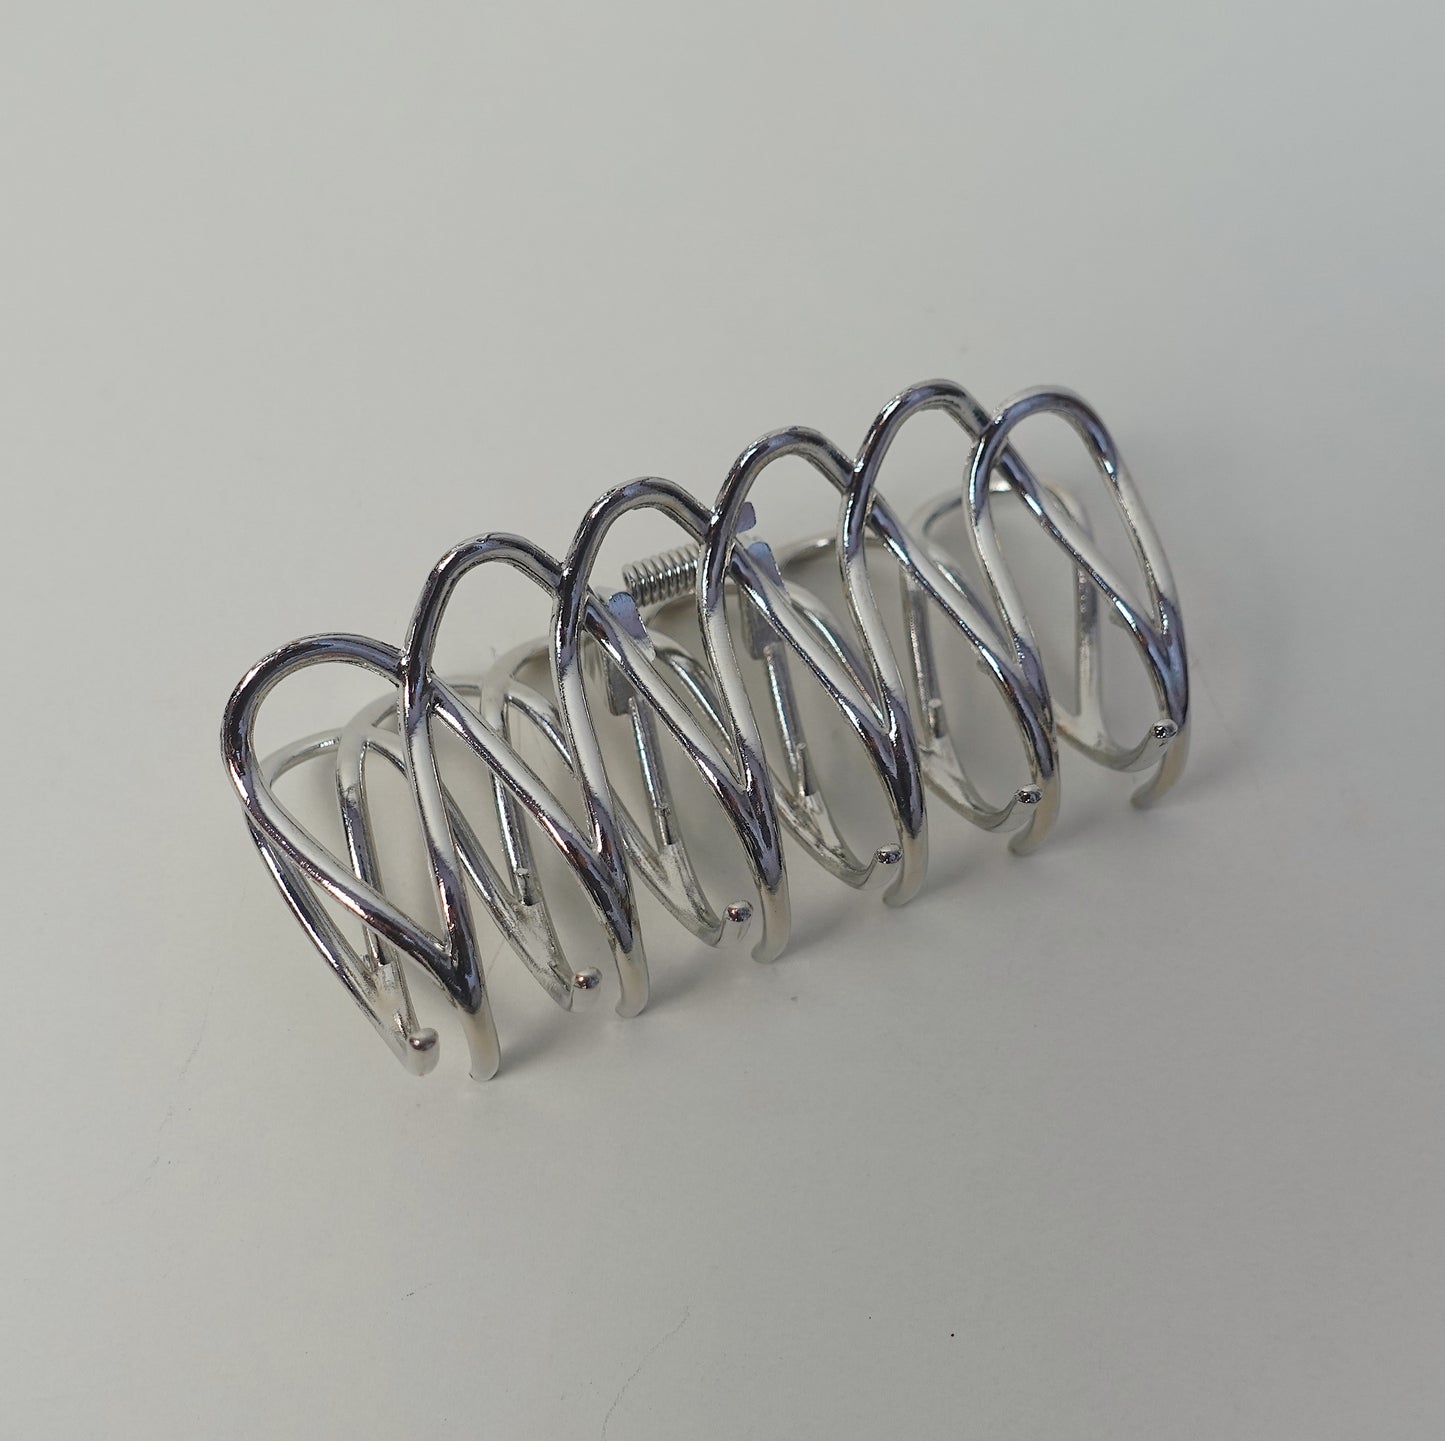 Metallic Claw Clips - Qwerky Colour